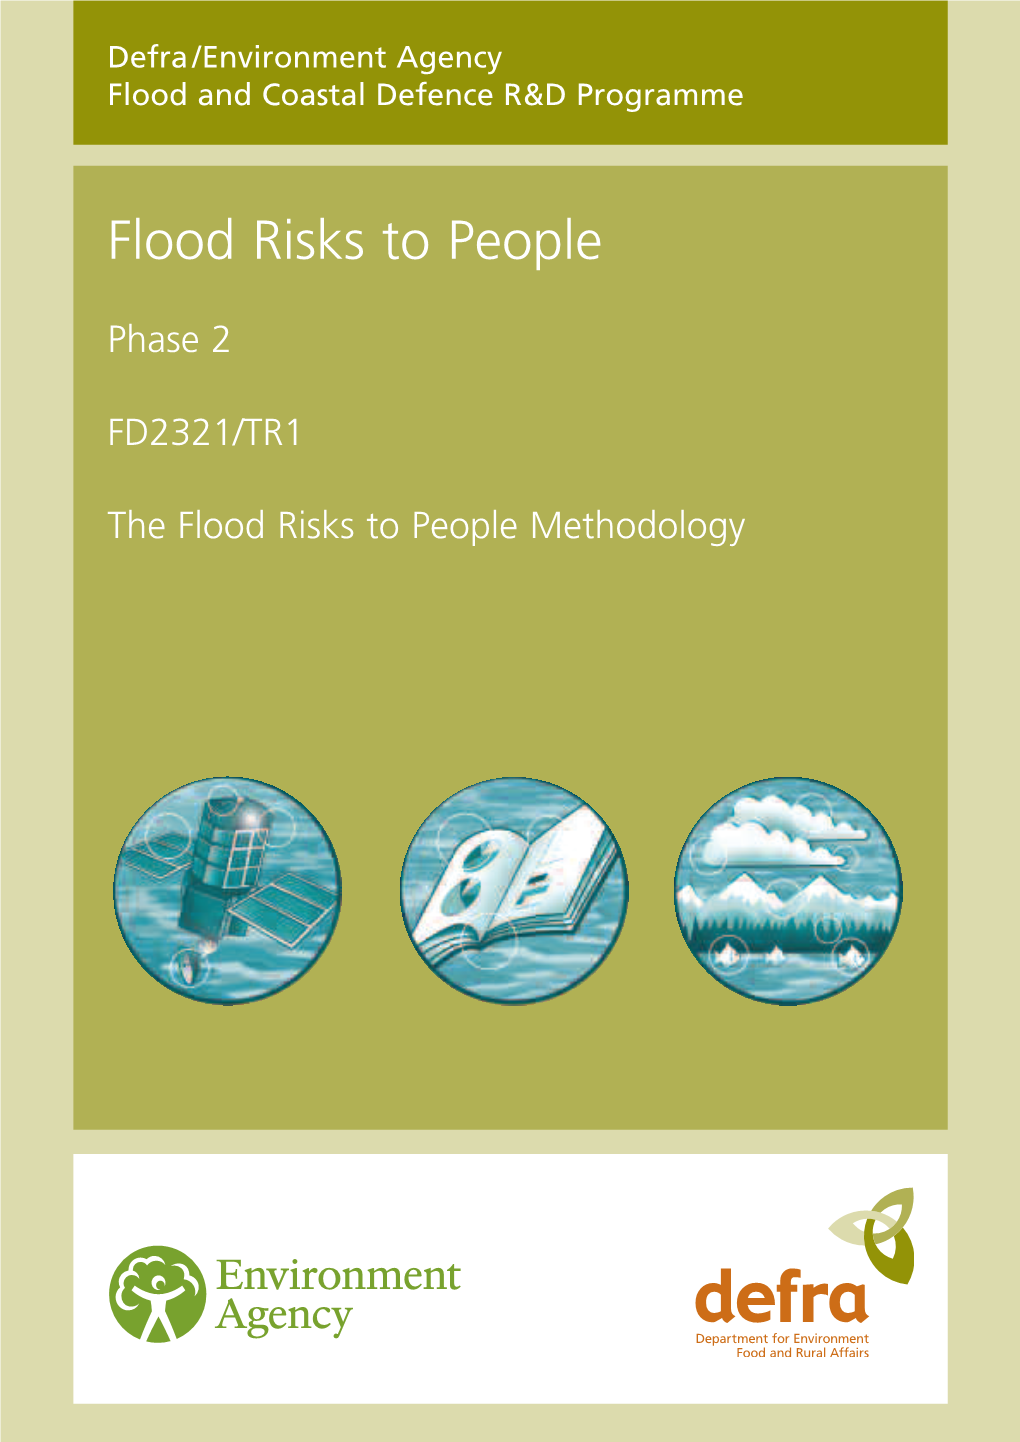 FD2321/TR1 the Flood Risks to People